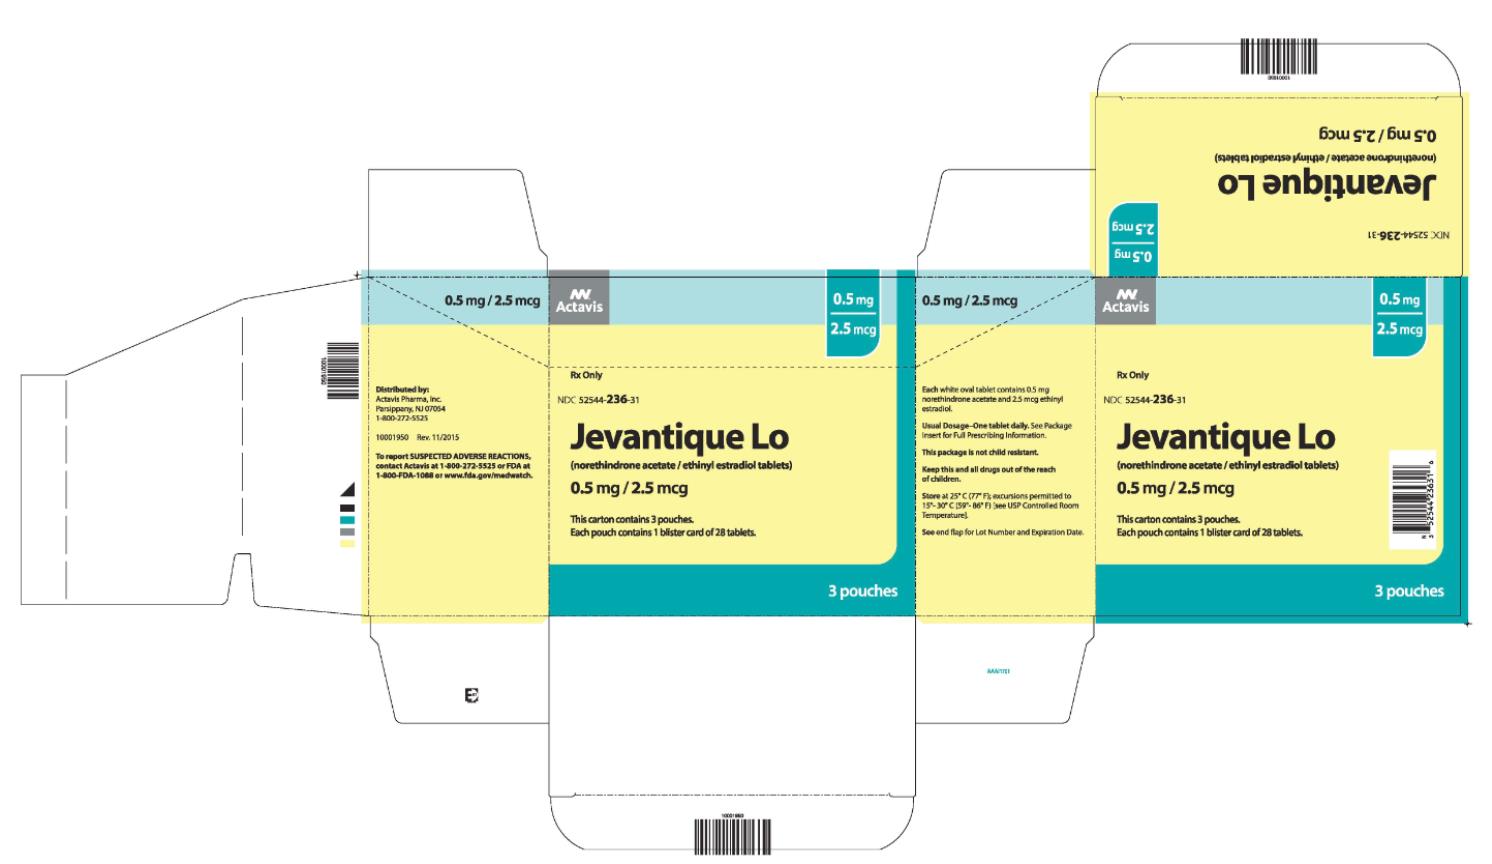 NDC 52544-236-31
Jevantique Lo
(norethindrone acetate/ ethinyl estradiol tablets
0.5 mg/ 2.5 mcg
3 Pouches
